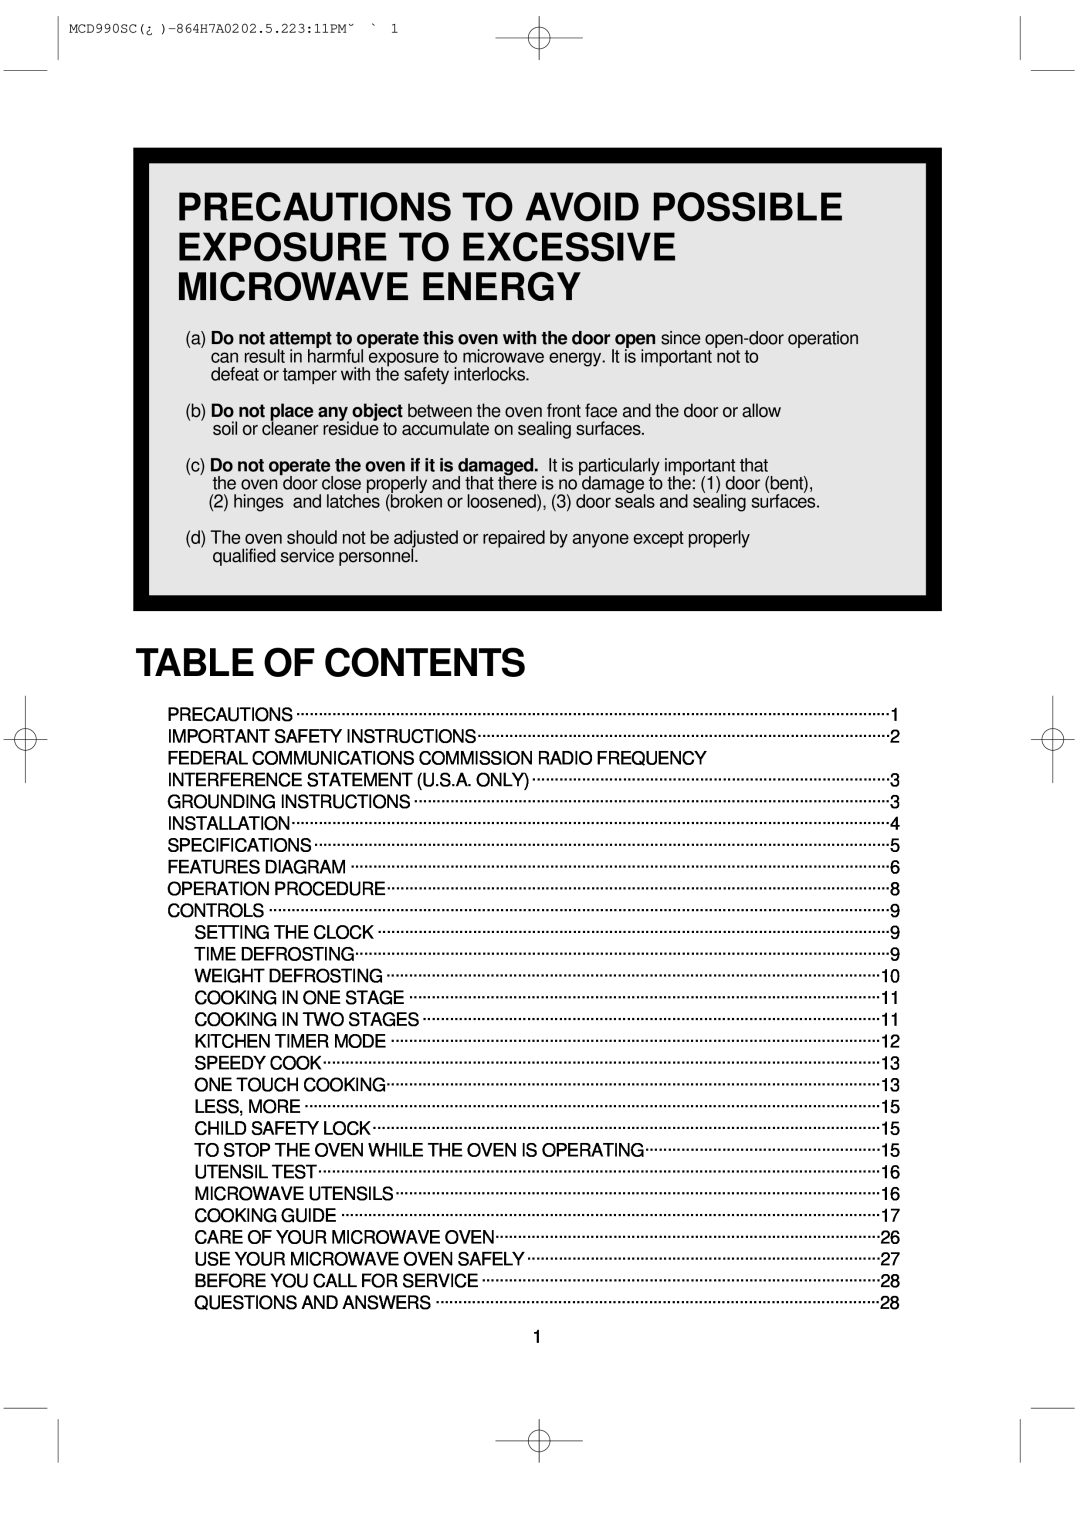 Magic Chef MCD990SC instruction manual Table Of Contents 